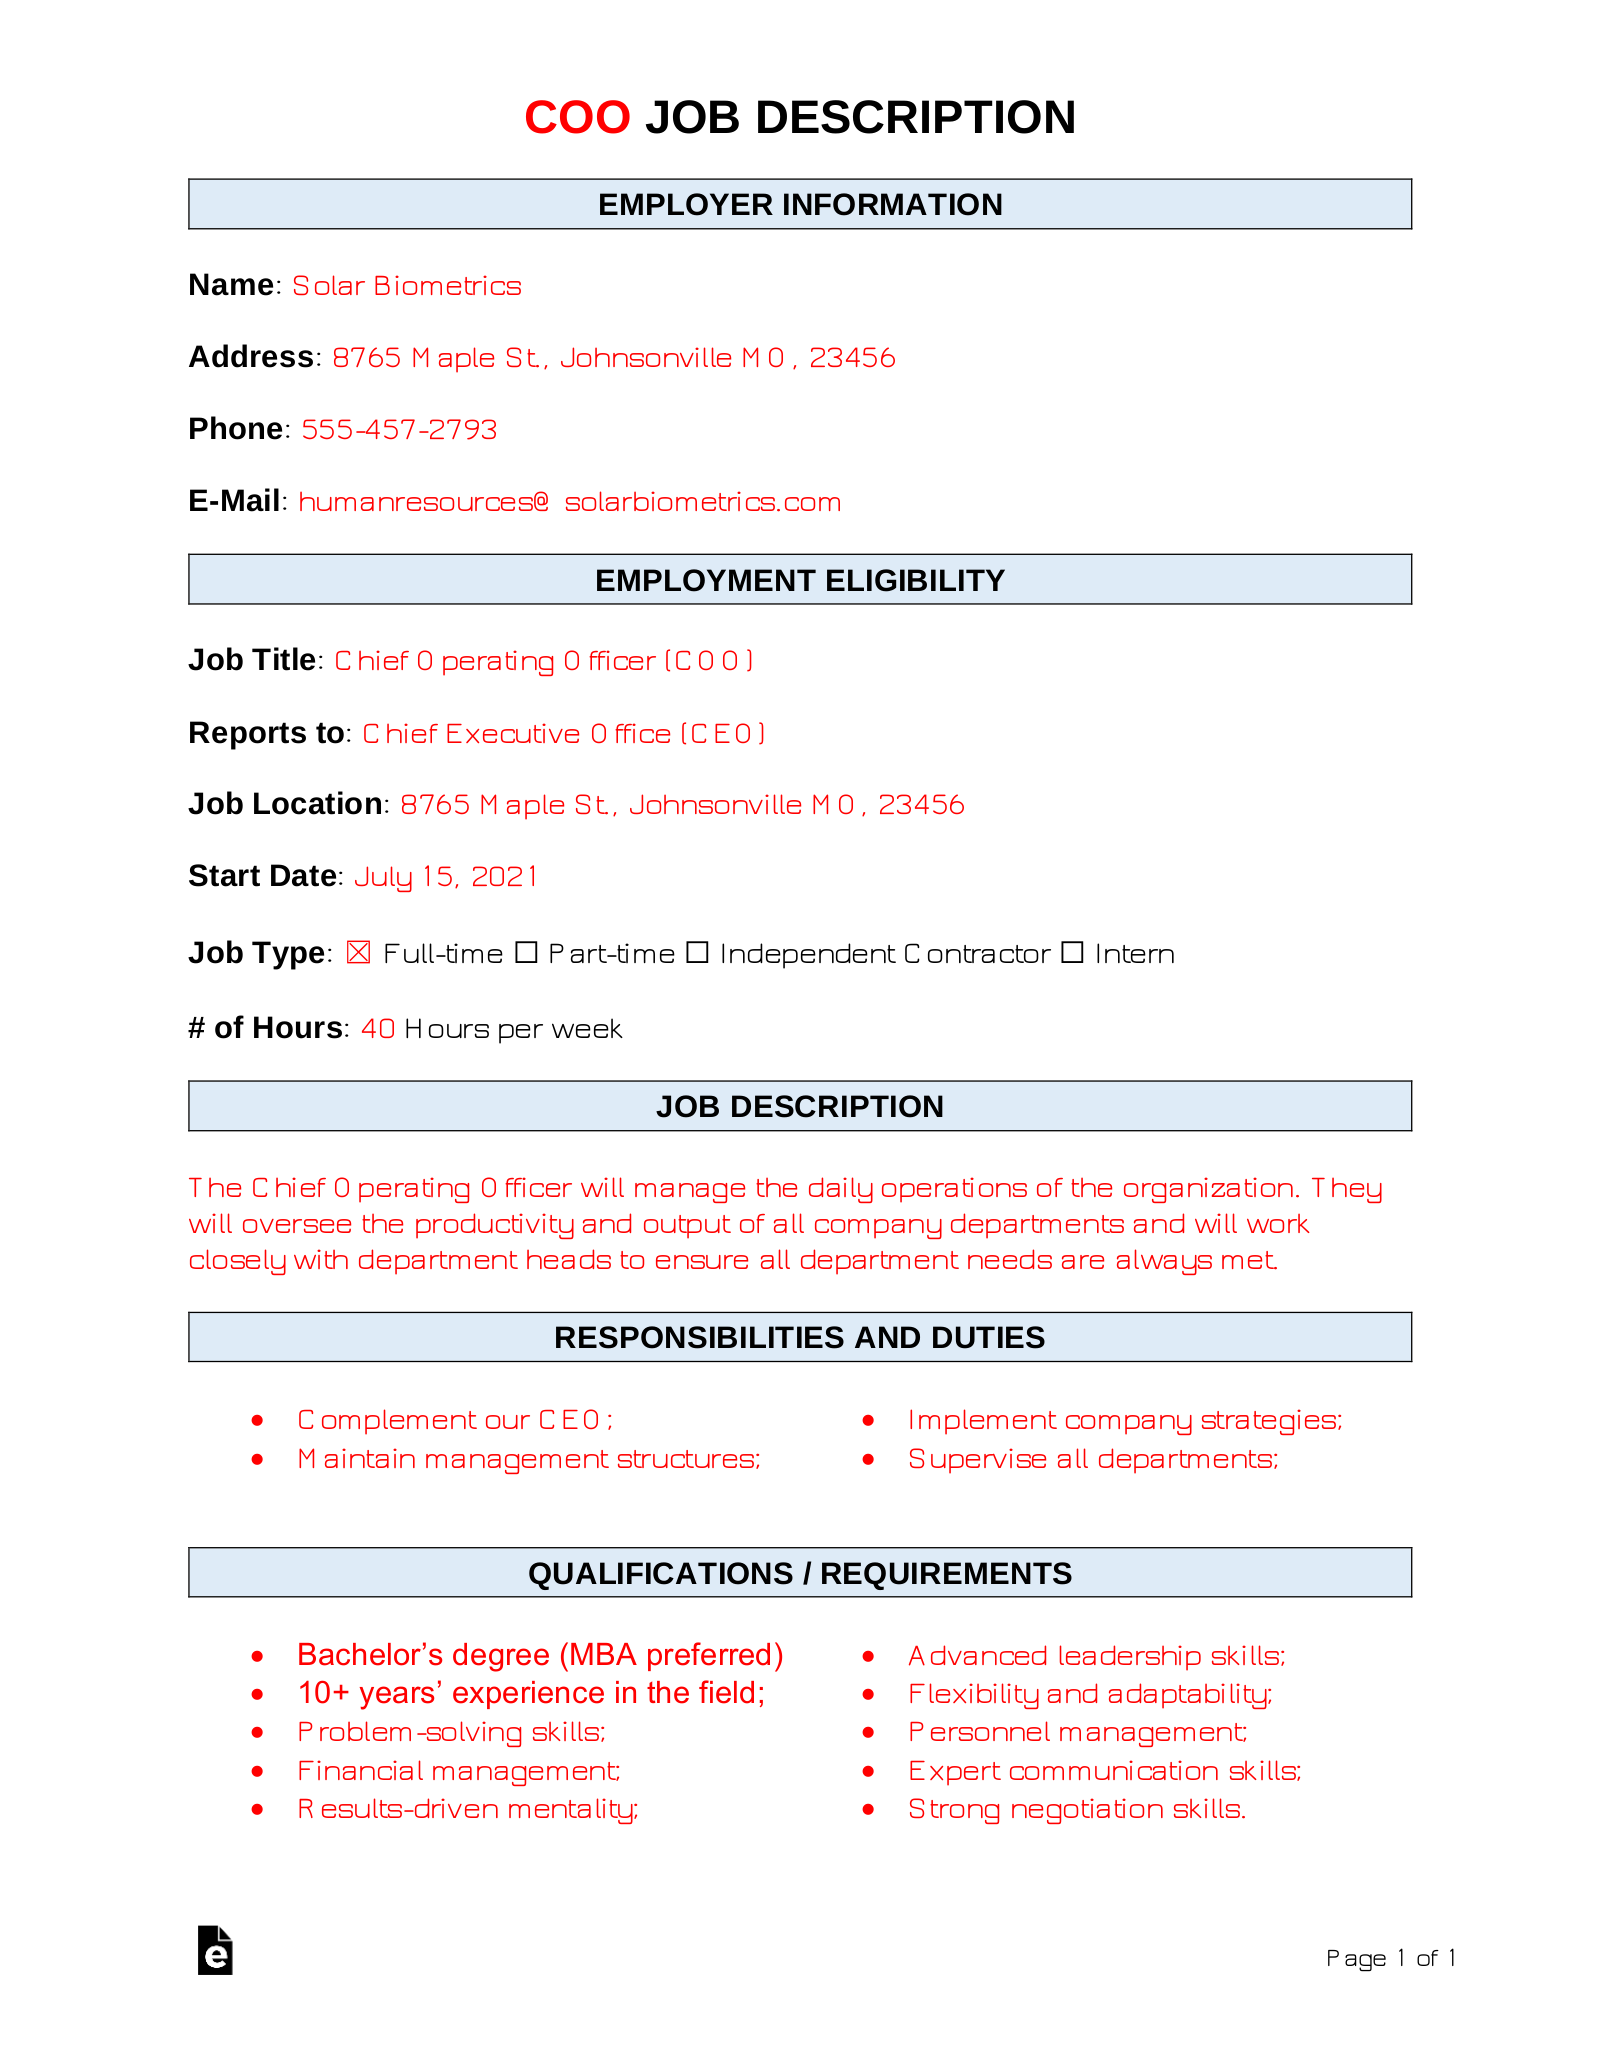 Chief Operating Officer (COO) Job Description Template | Sample